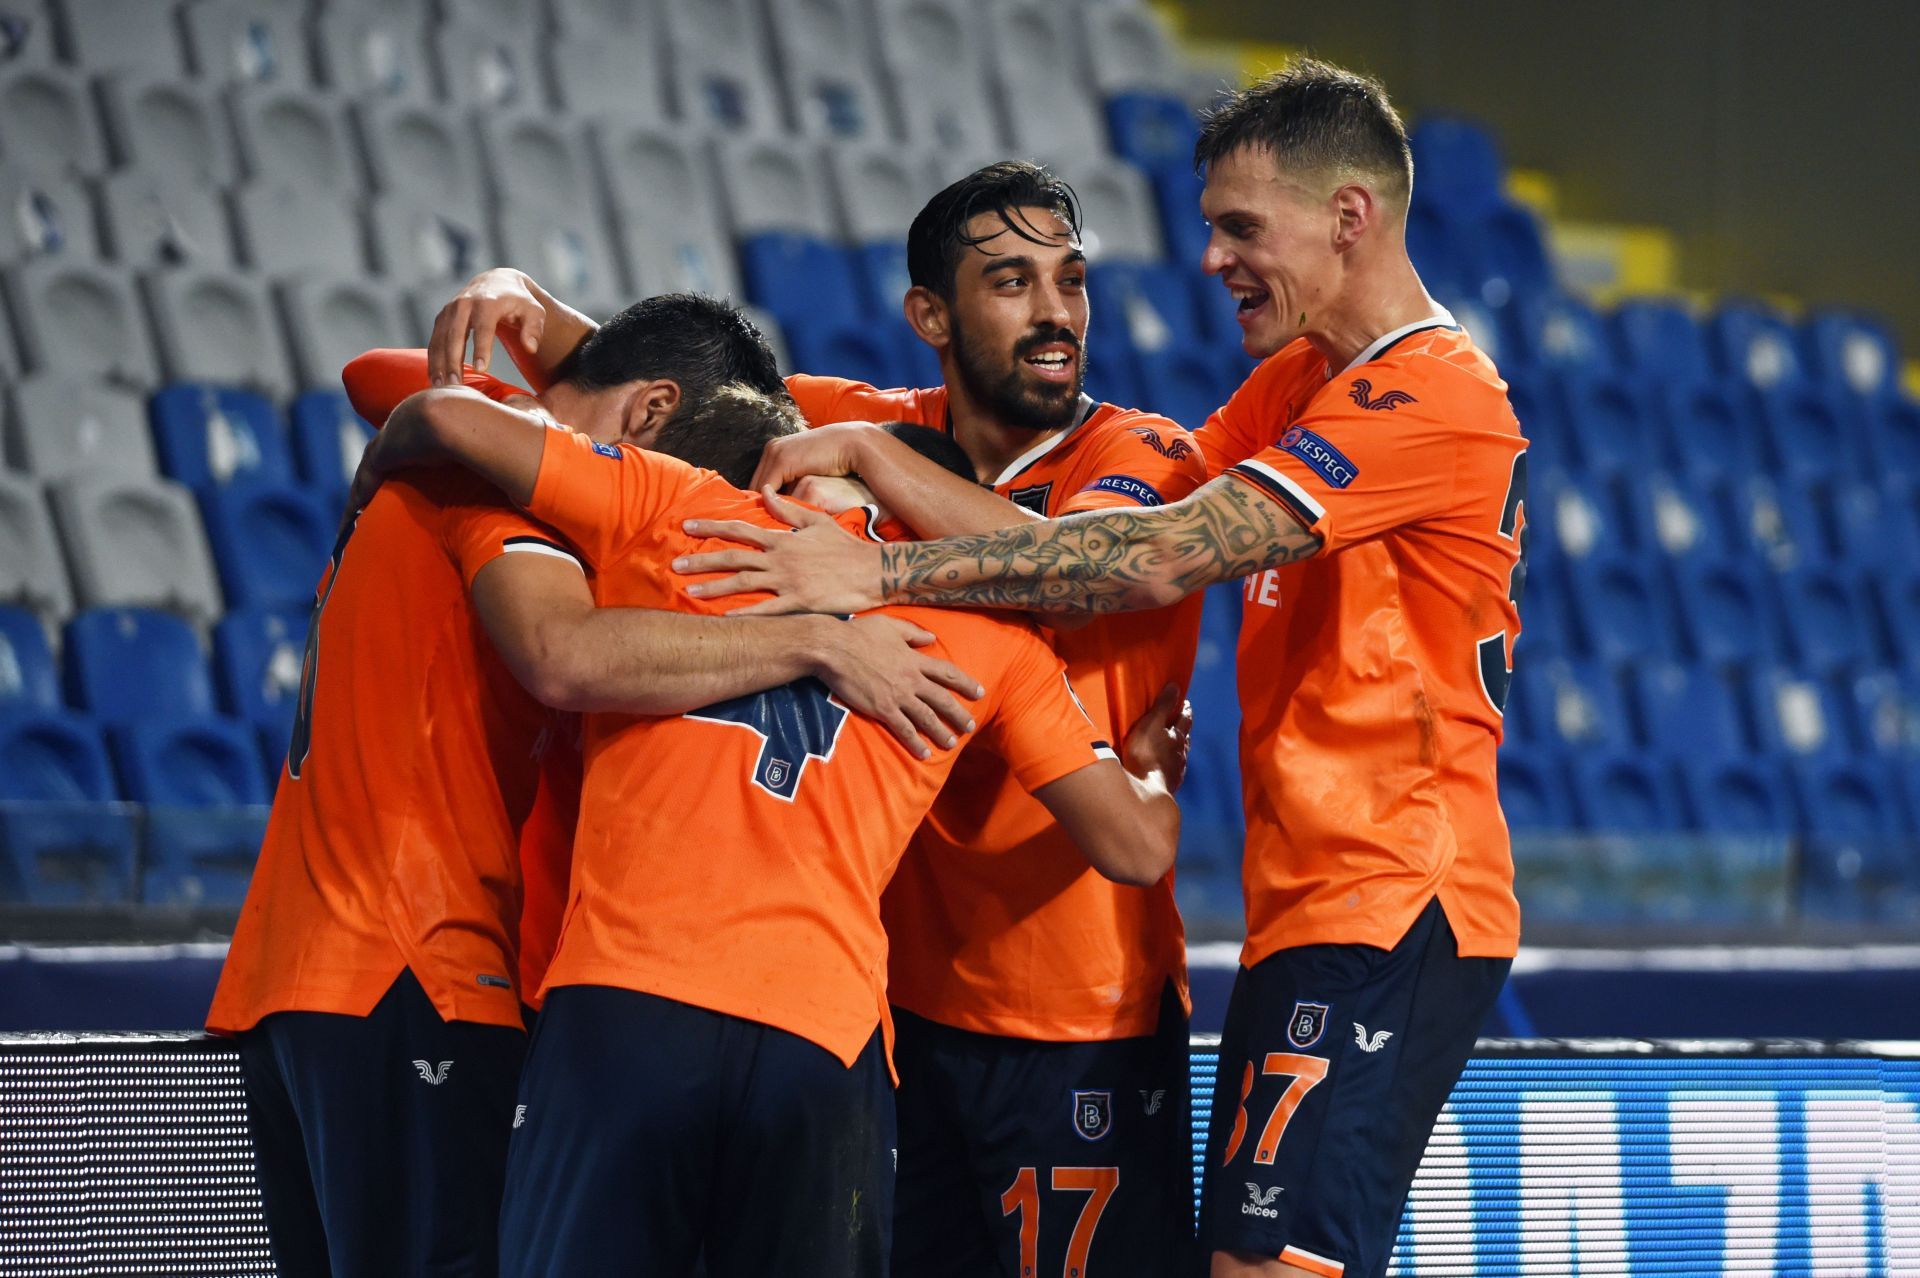 Istanbul Basaksehir and Breidablik will meet for the first time.